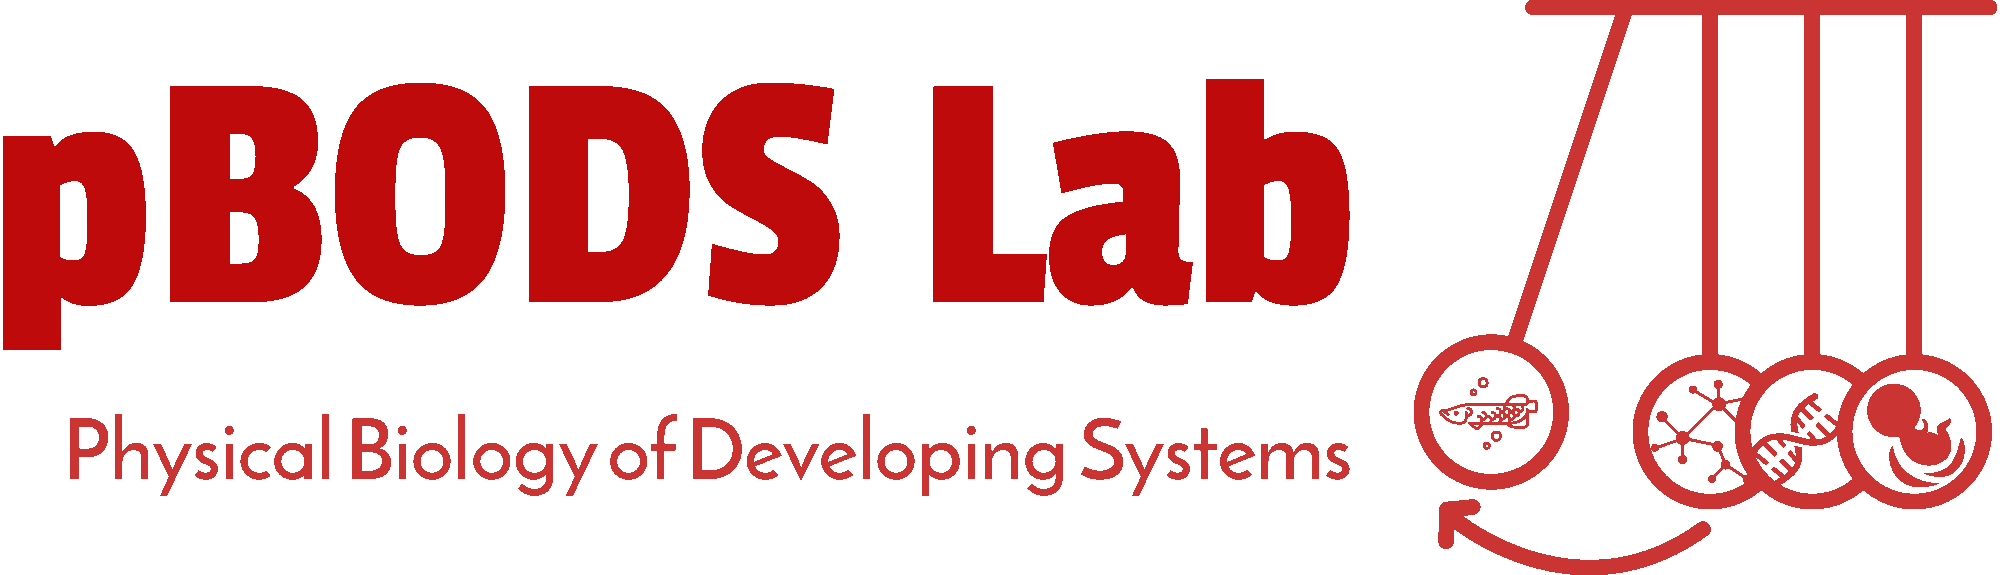 Physical Biology of Developing Systems Lab